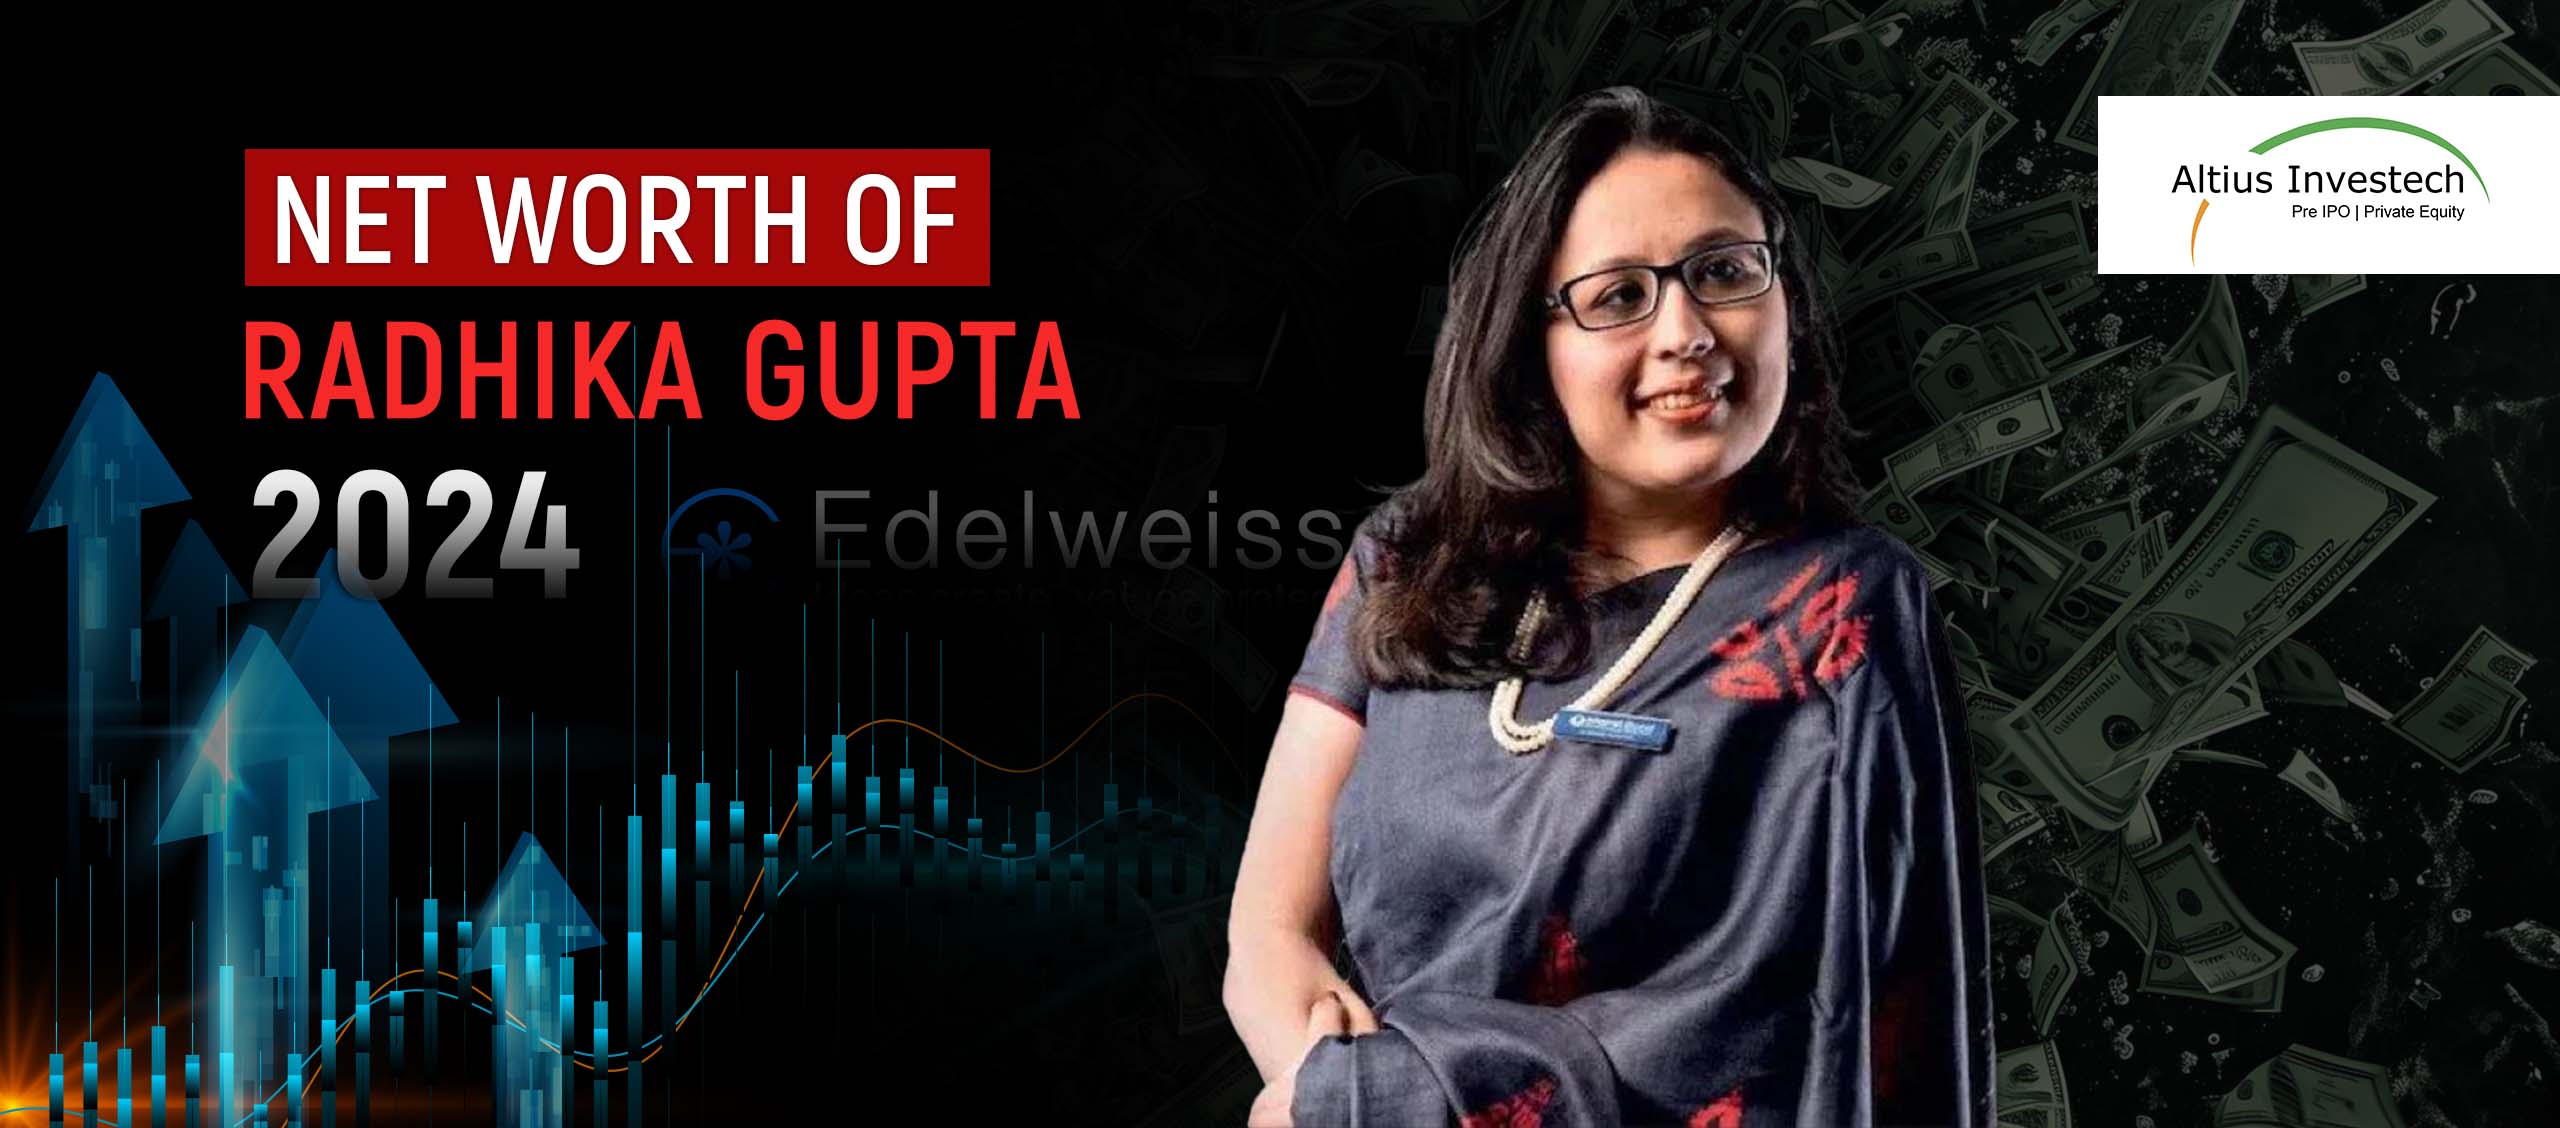 You are currently viewing The Investment Mindset: How Radhika Gupta’s Net Worth Influences Her Role on Shark Tank India Season 3